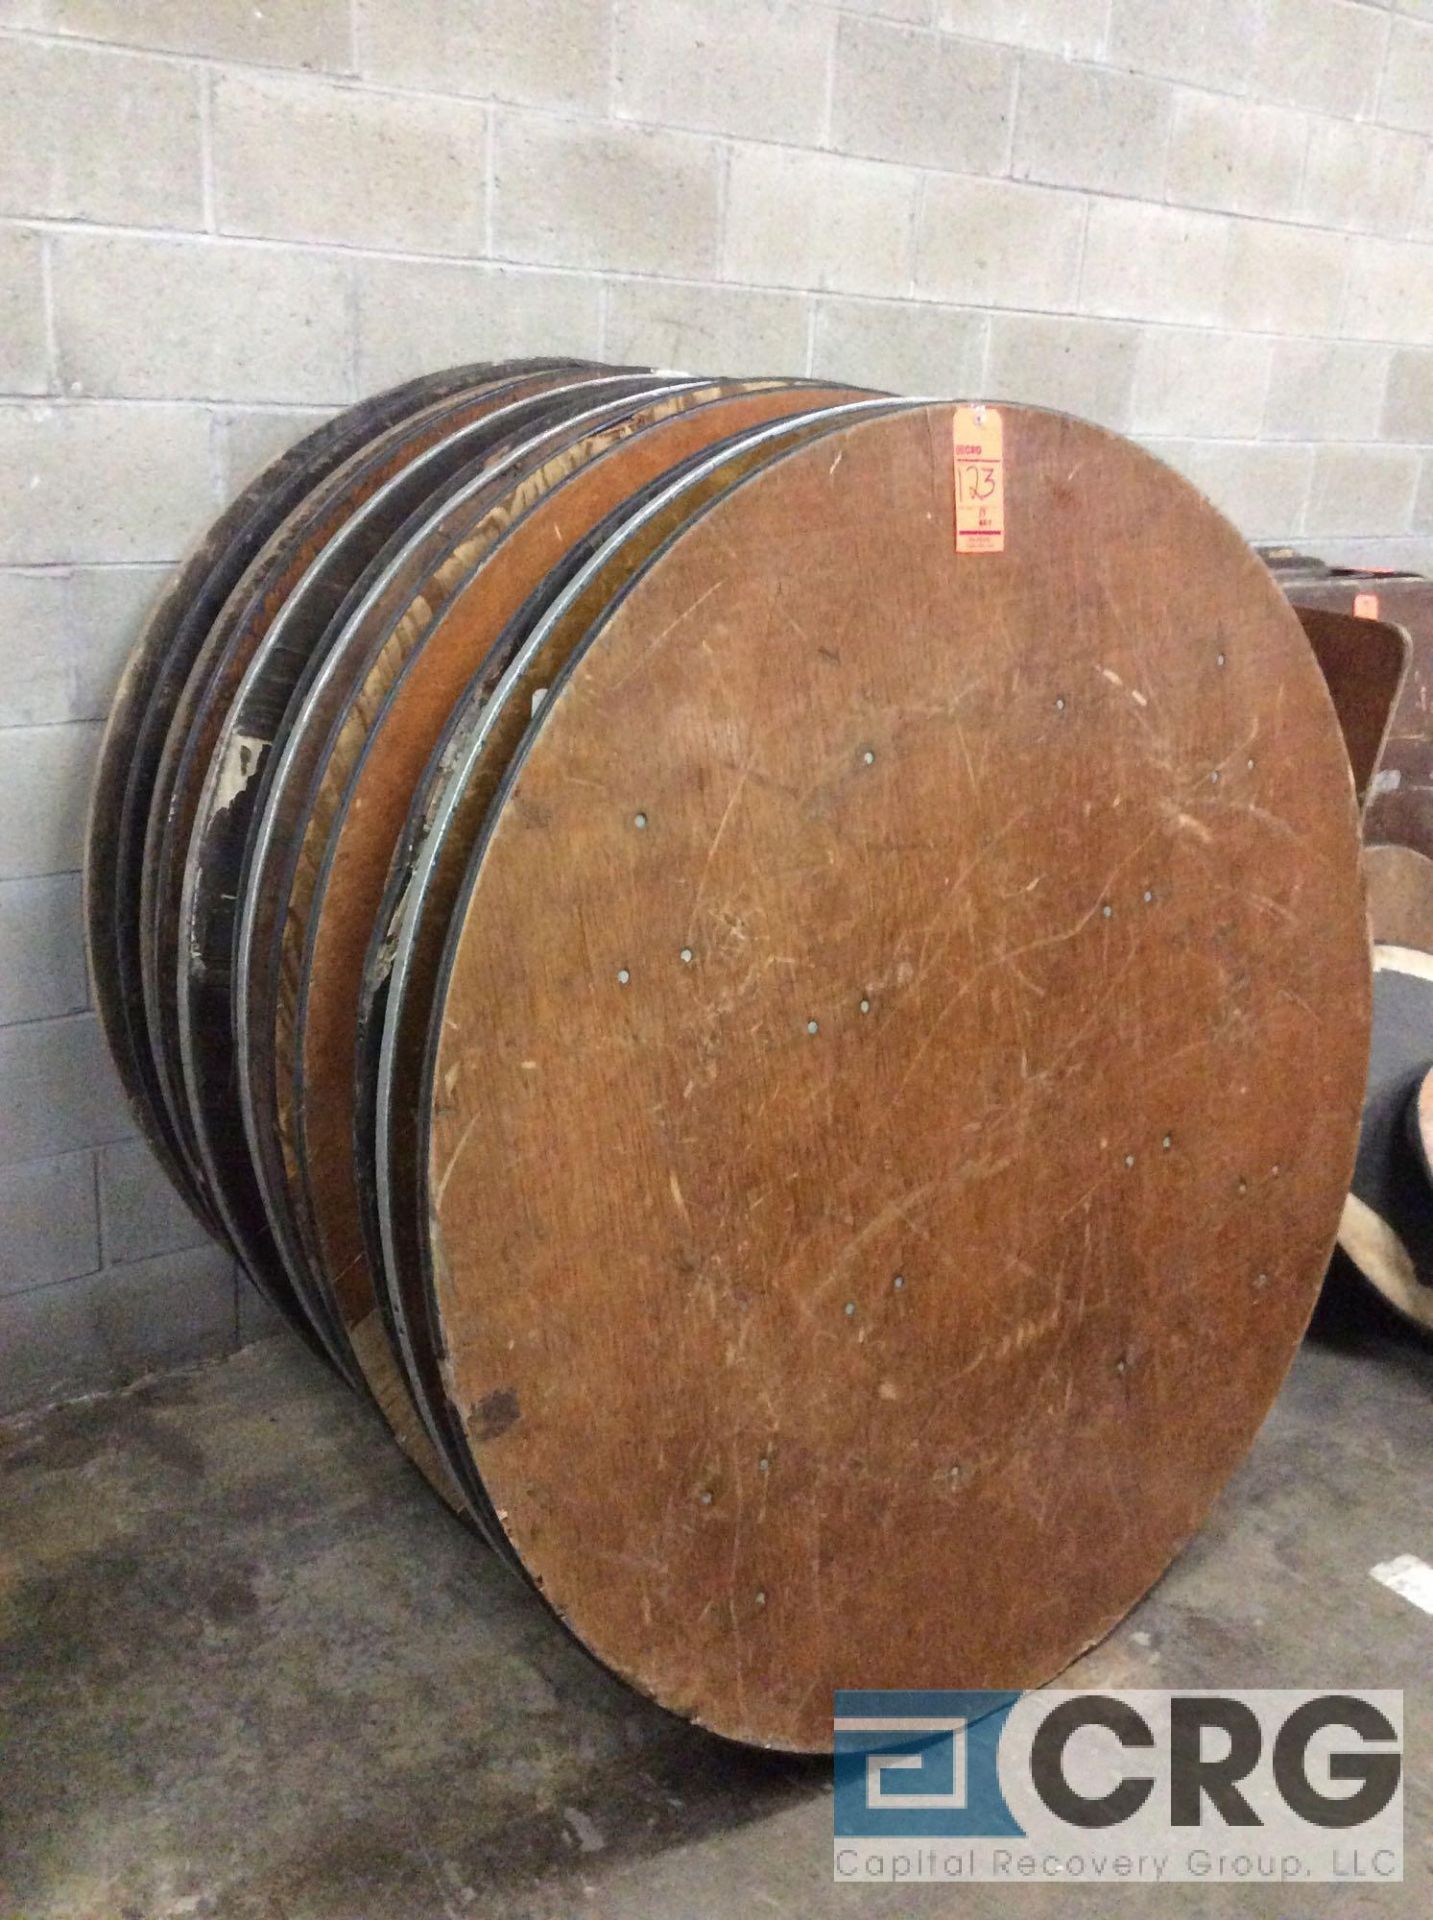 Lot of (13) assorted folding leg wood banquet tables, (1) 72" diameter, and (12) 60" diameter. - Image 2 of 2